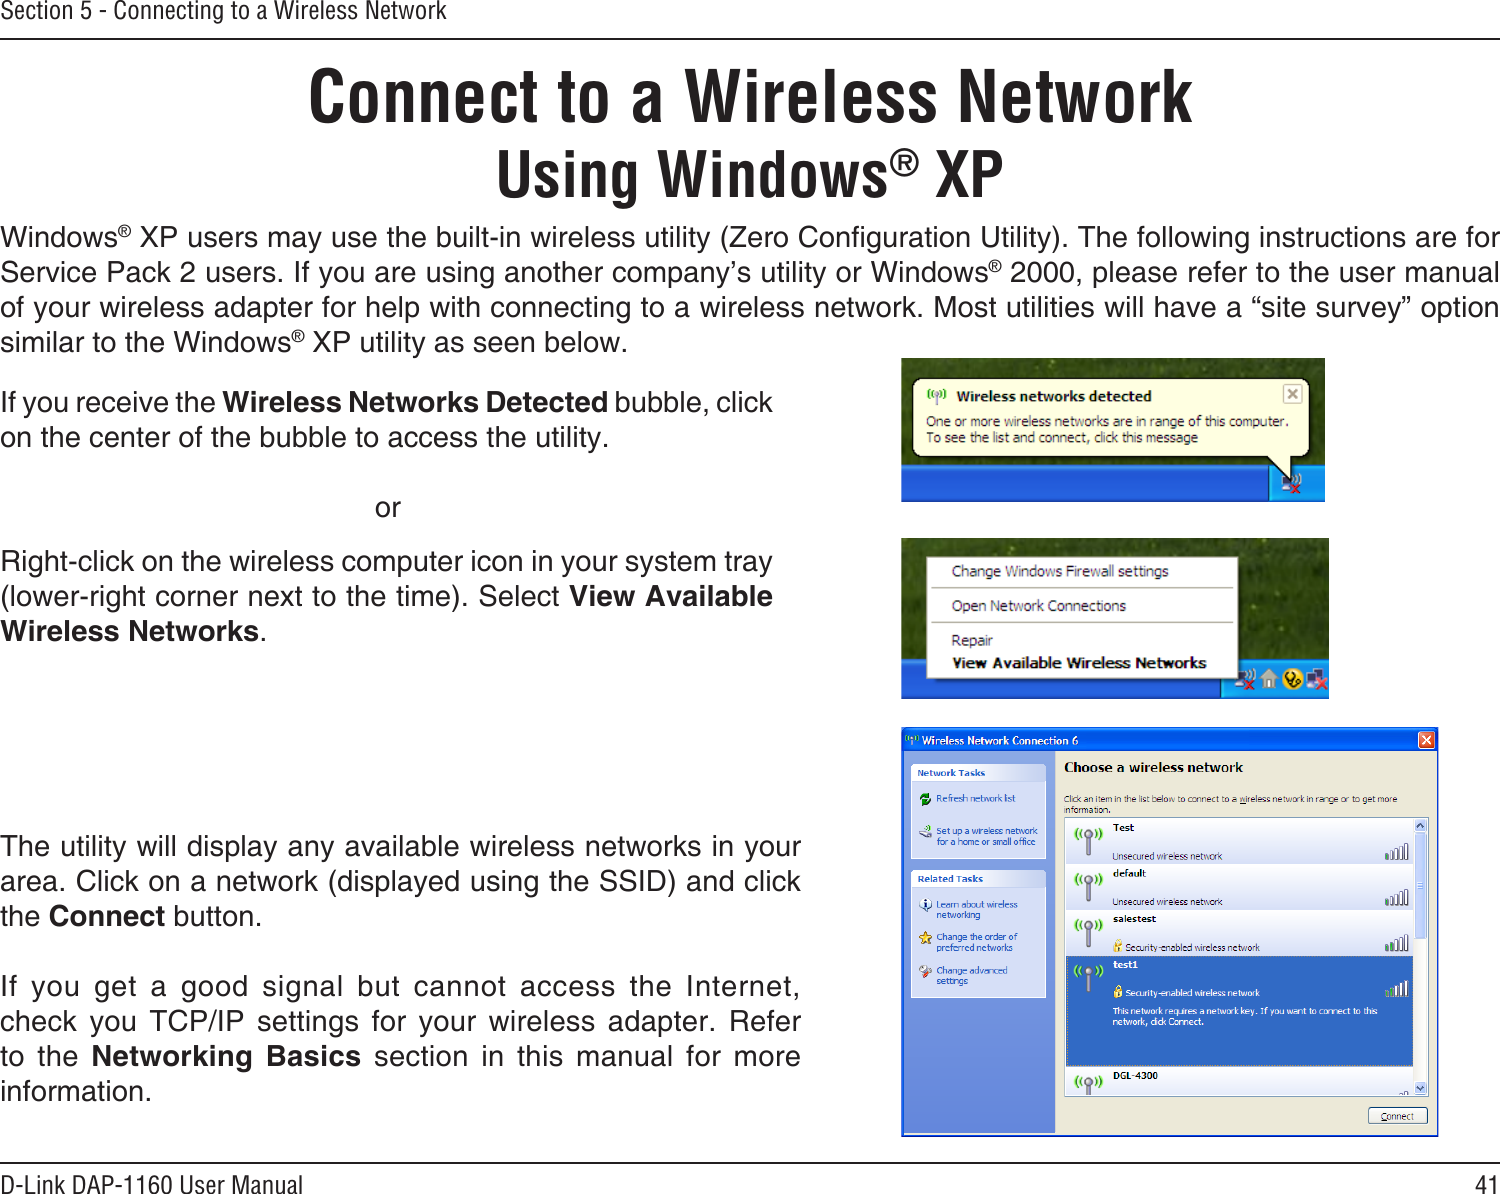 41D-Link DAP-1160 User ManualSection 5 - Connecting to a Wireless NetworkConnect to a Wireless NetworkUsing Windows® XPWindows® XP users may use the built-in wireless utility (Zero Conguration Utility). The following instructions are for Service Pack 2 users. If you are using another company’s utility or Windows® 2000, please refer to the user manual of your wireless adapter for help with connecting to a wireless network. Most utilities will have a “site survey” option similar to the Windows® XP utility as seen below.Right-click on the wireless computer icon in your system tray (lower-right corner next to the time). Select View Available Wireless Networks.If you receive the Wireless Networks Detected bubble, click on the center of the bubble to access the utility.     orThe utility will display any available wireless networks in your area. Click on a network (displayed using the SSID) and click the Connect button.If  you  get  a  good  signal  but  cannot  access  the  Internet, check  you  TCP/IP  settings  for  your  wireless  adapter.  Refer to  the  Networking  Basics  section  in  this  manual  for  more information.